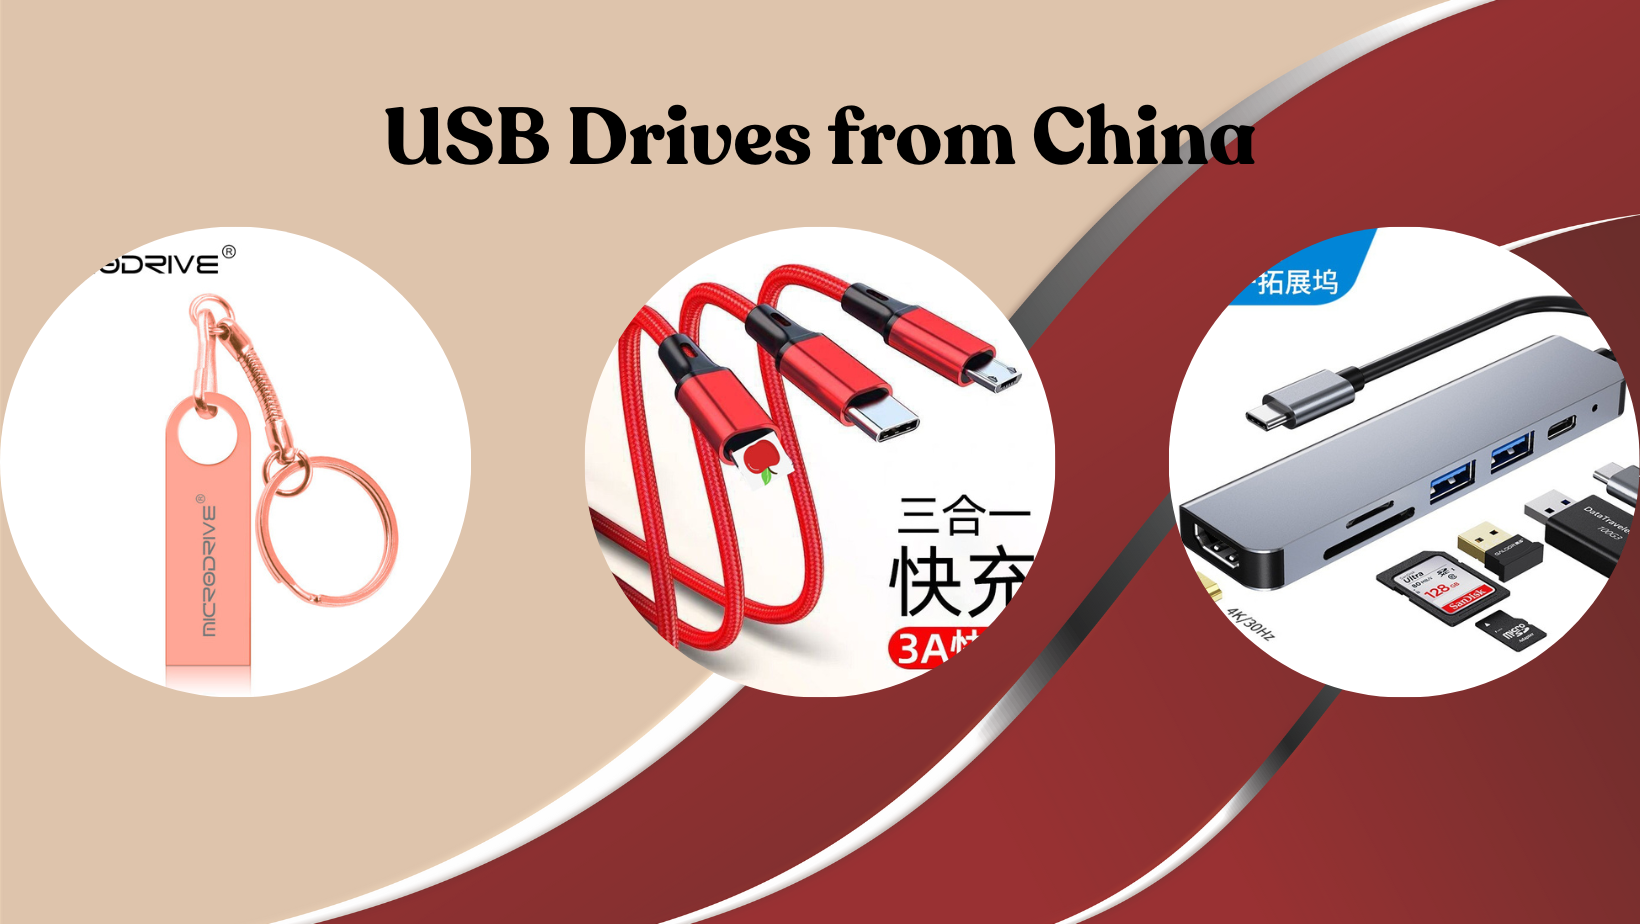 Importing USB Drives from China to Malaysia